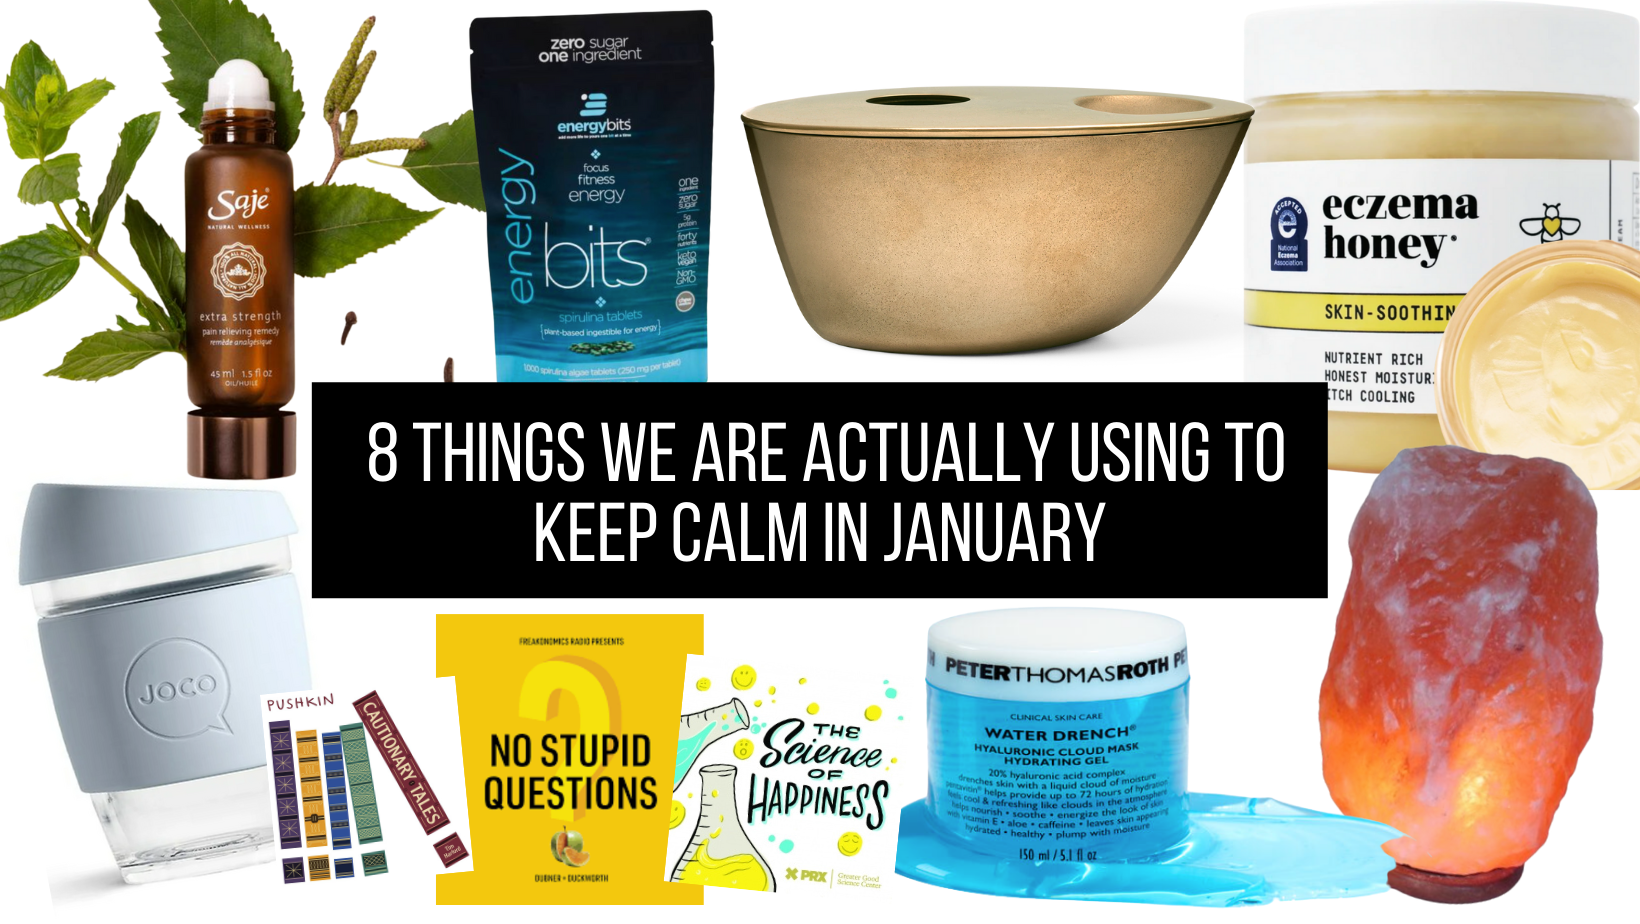 8 Things We Are Actually Using to Keep Calm in January